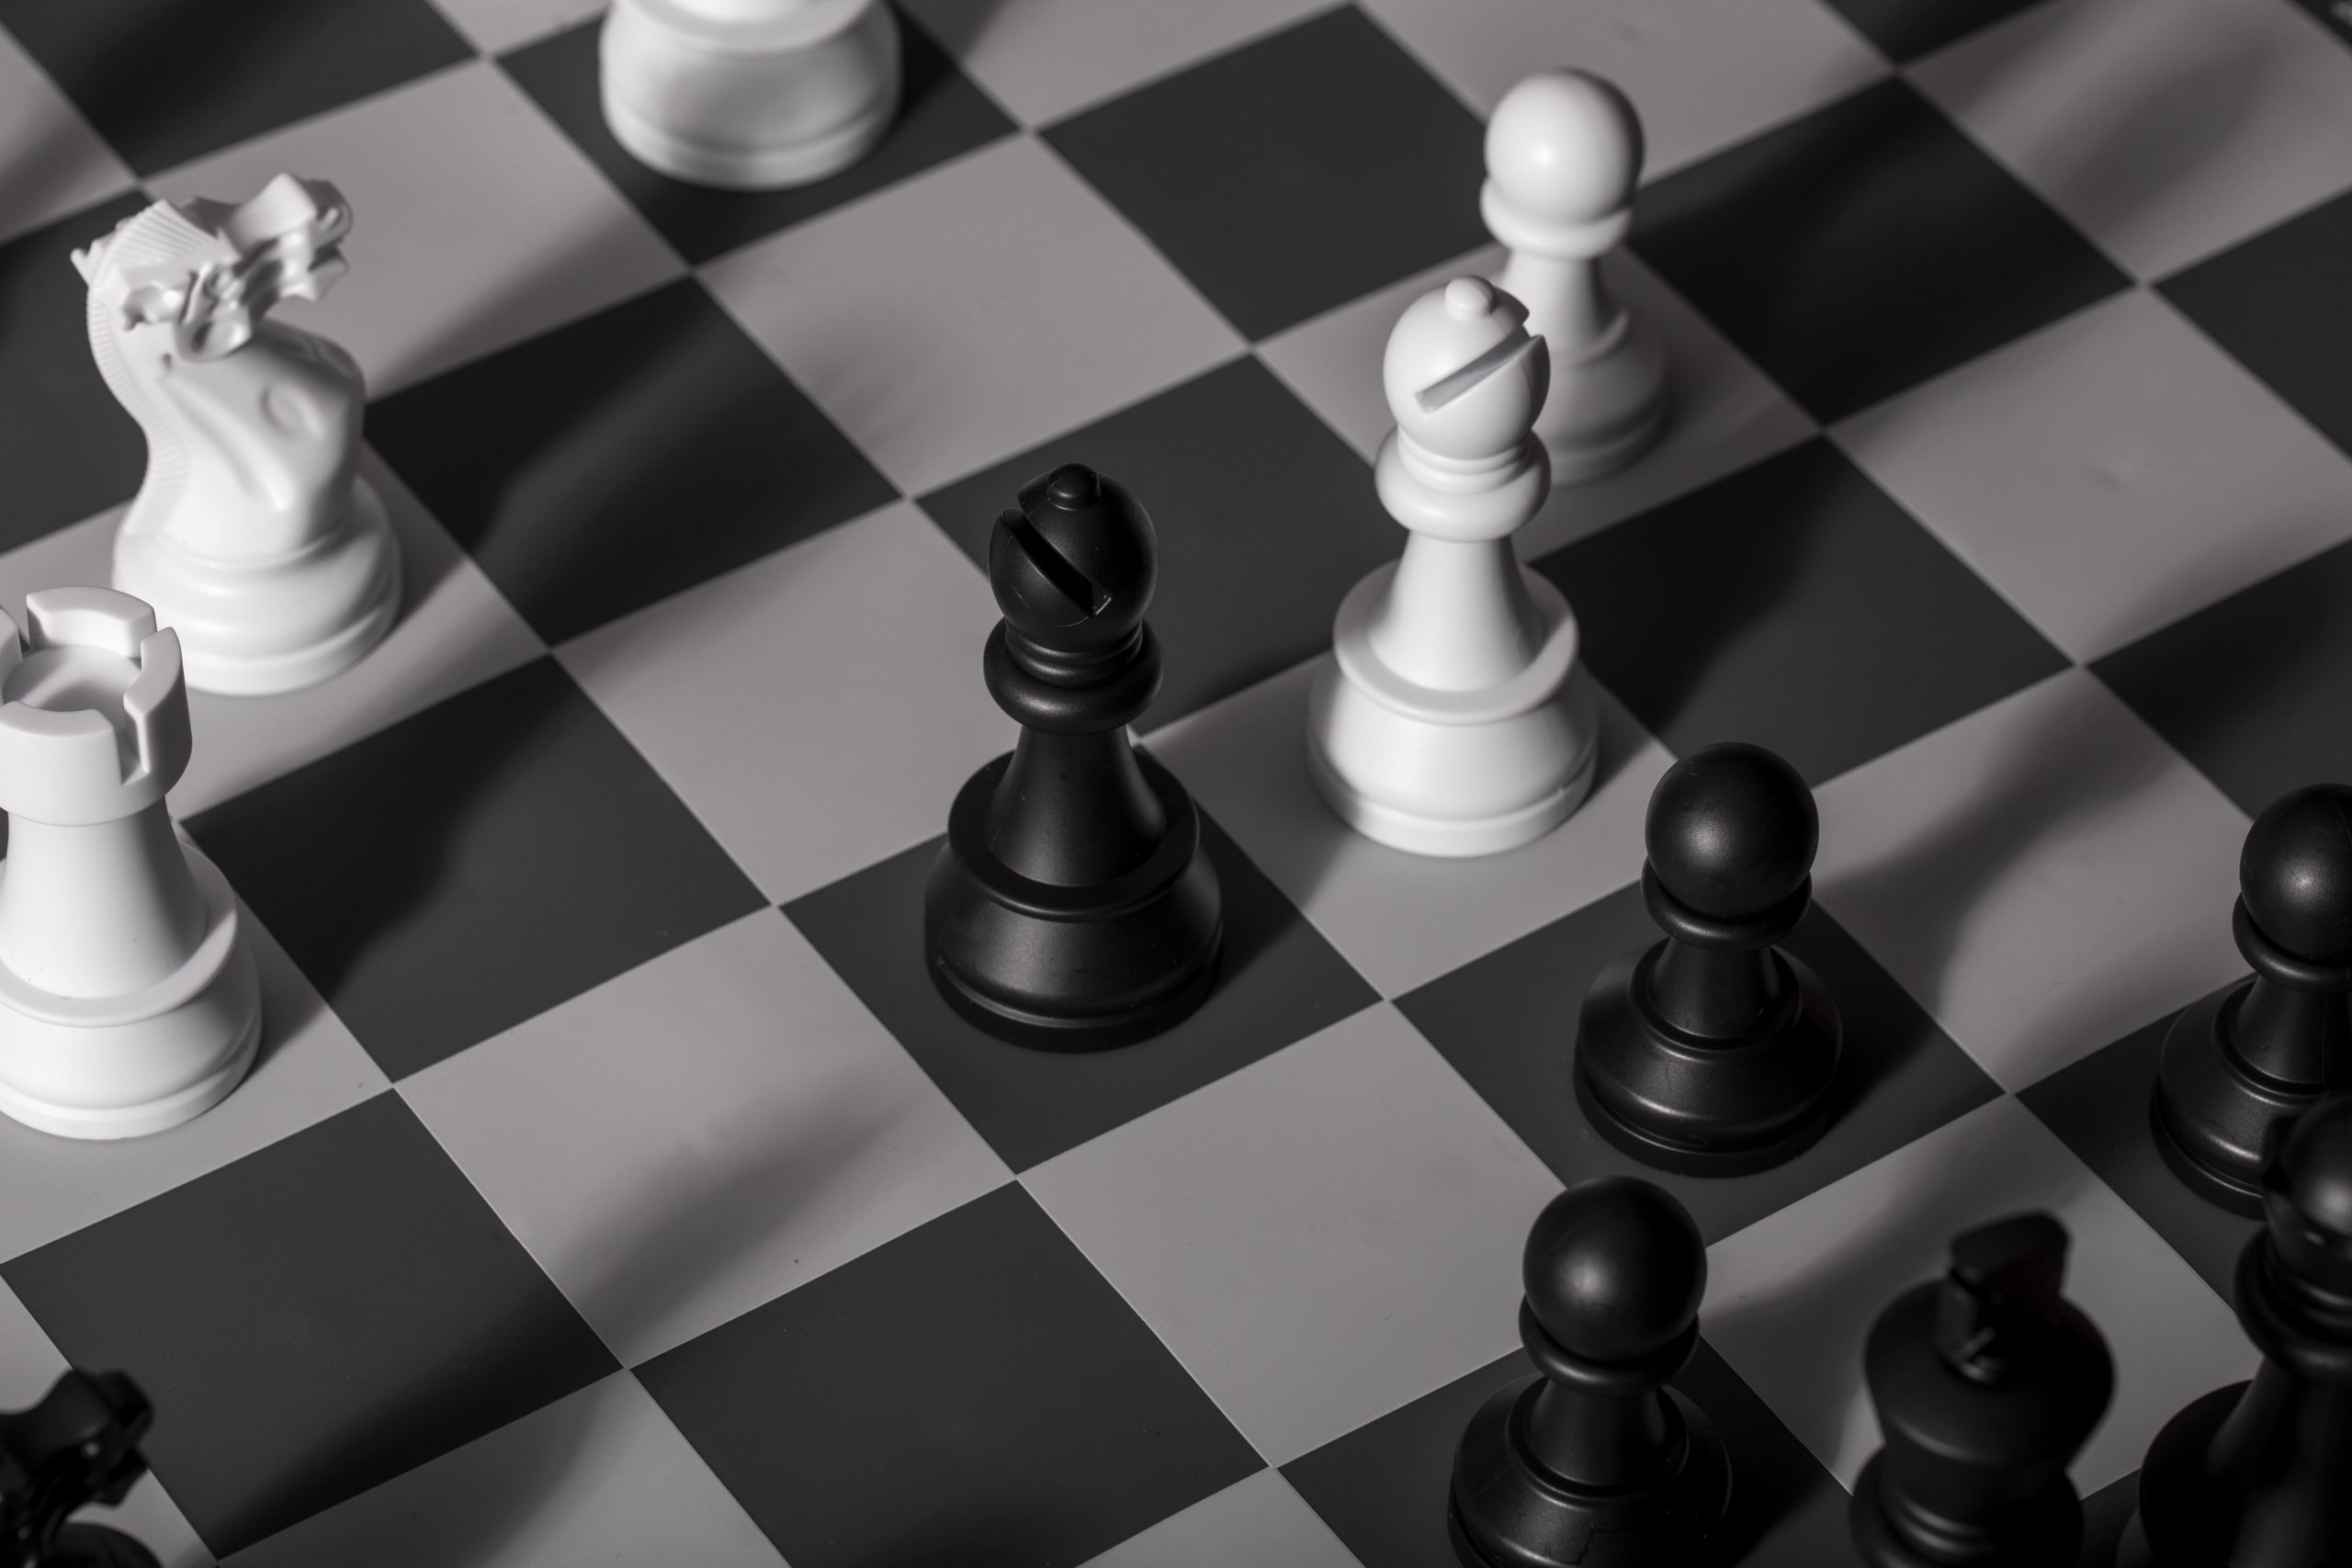 Know The Proper Chess Board Setup - Chess Game Strategies